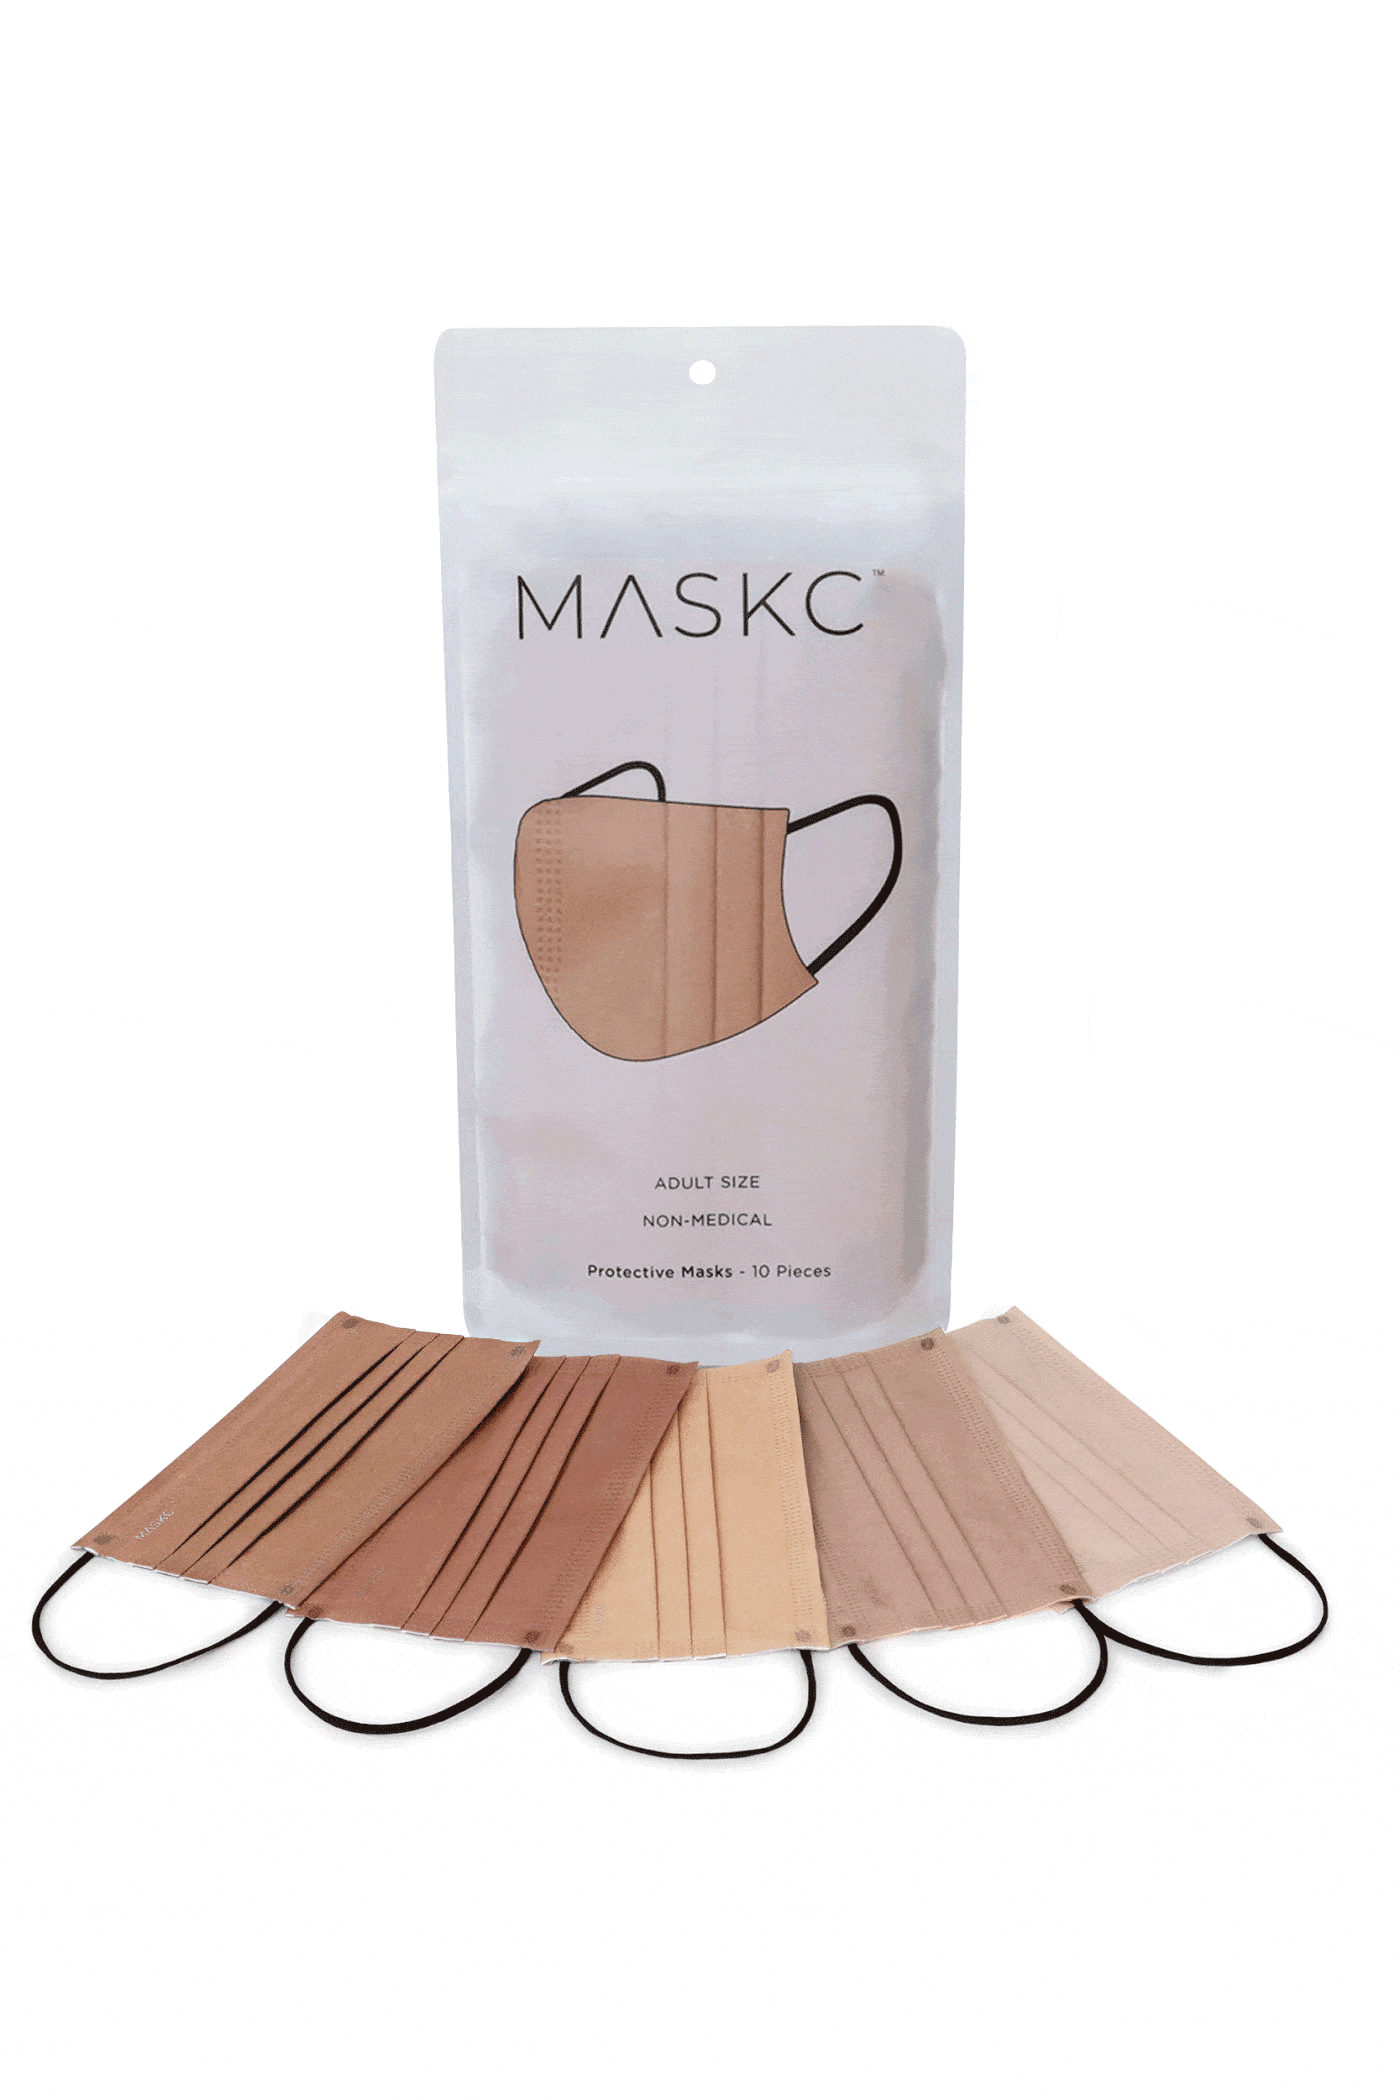 Pack of Skin Toned Pleated face masks. Each pack contains stylish high quality face masks. 